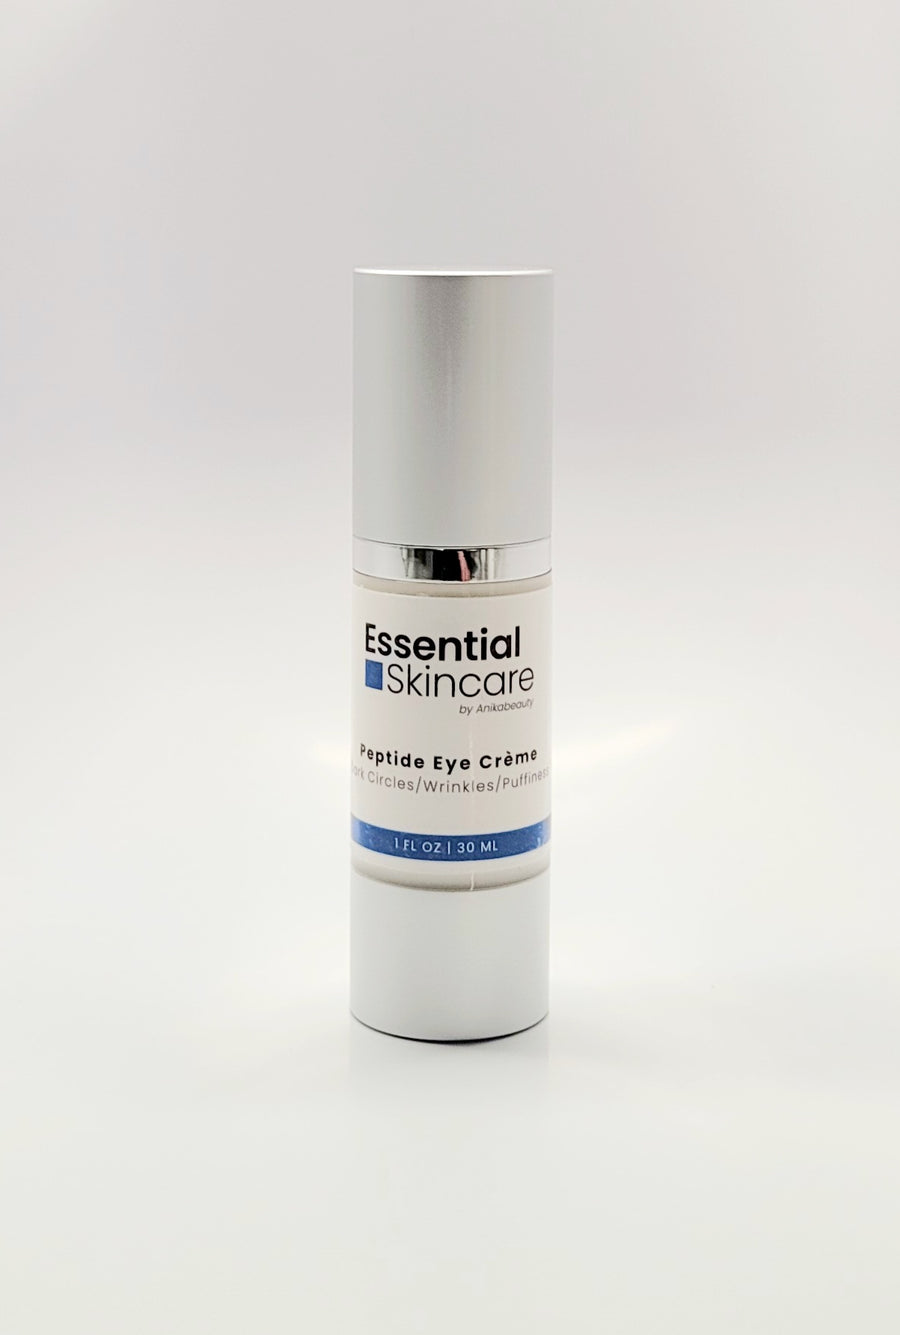 peptide eye cream essential skincare by anikabeauty